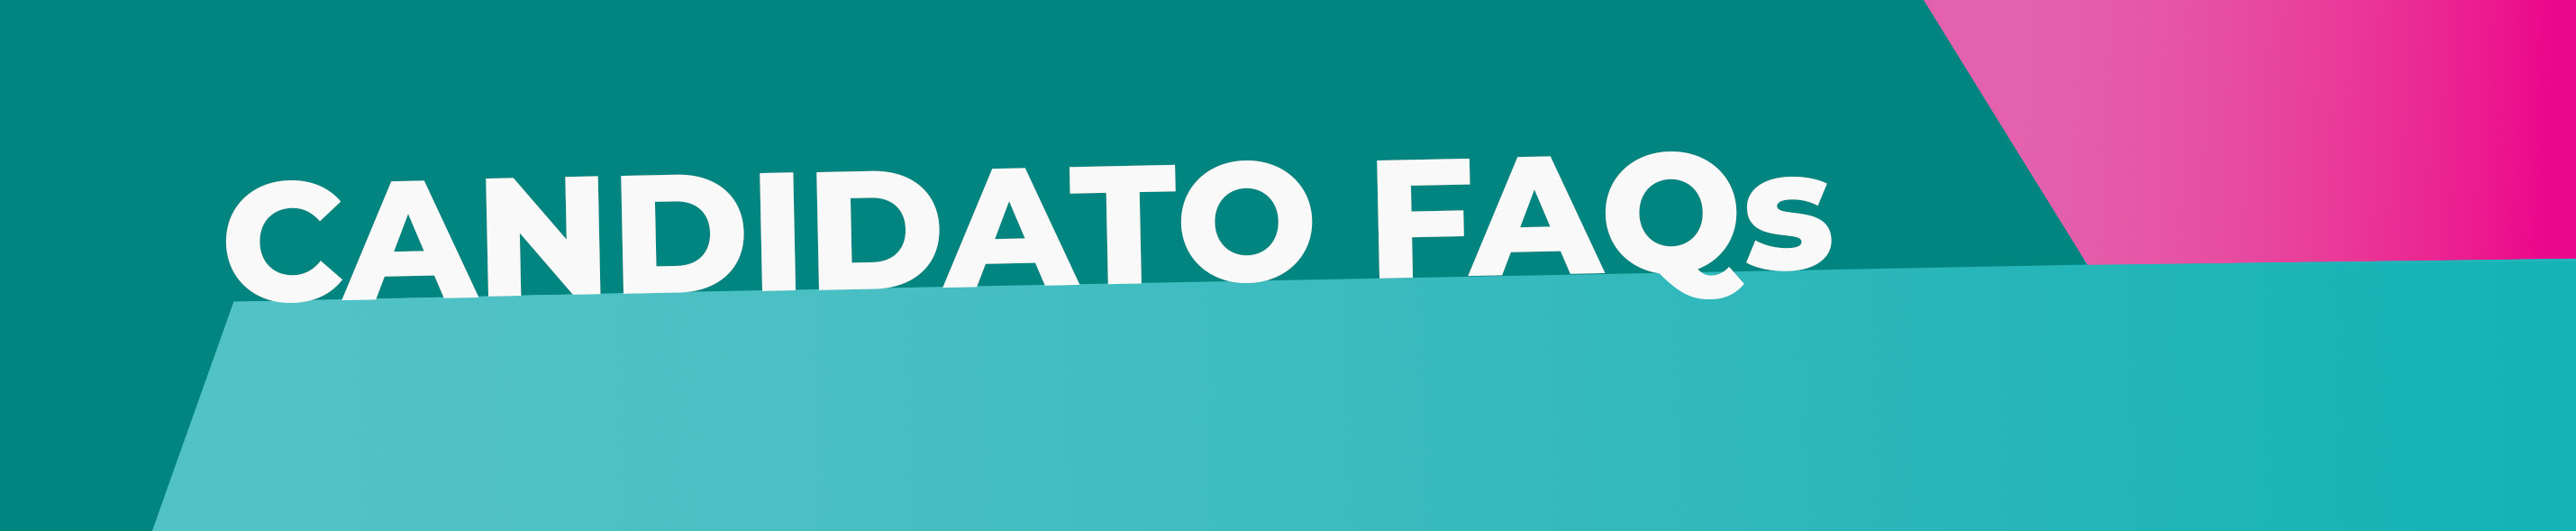 Candidate FAQs Banner